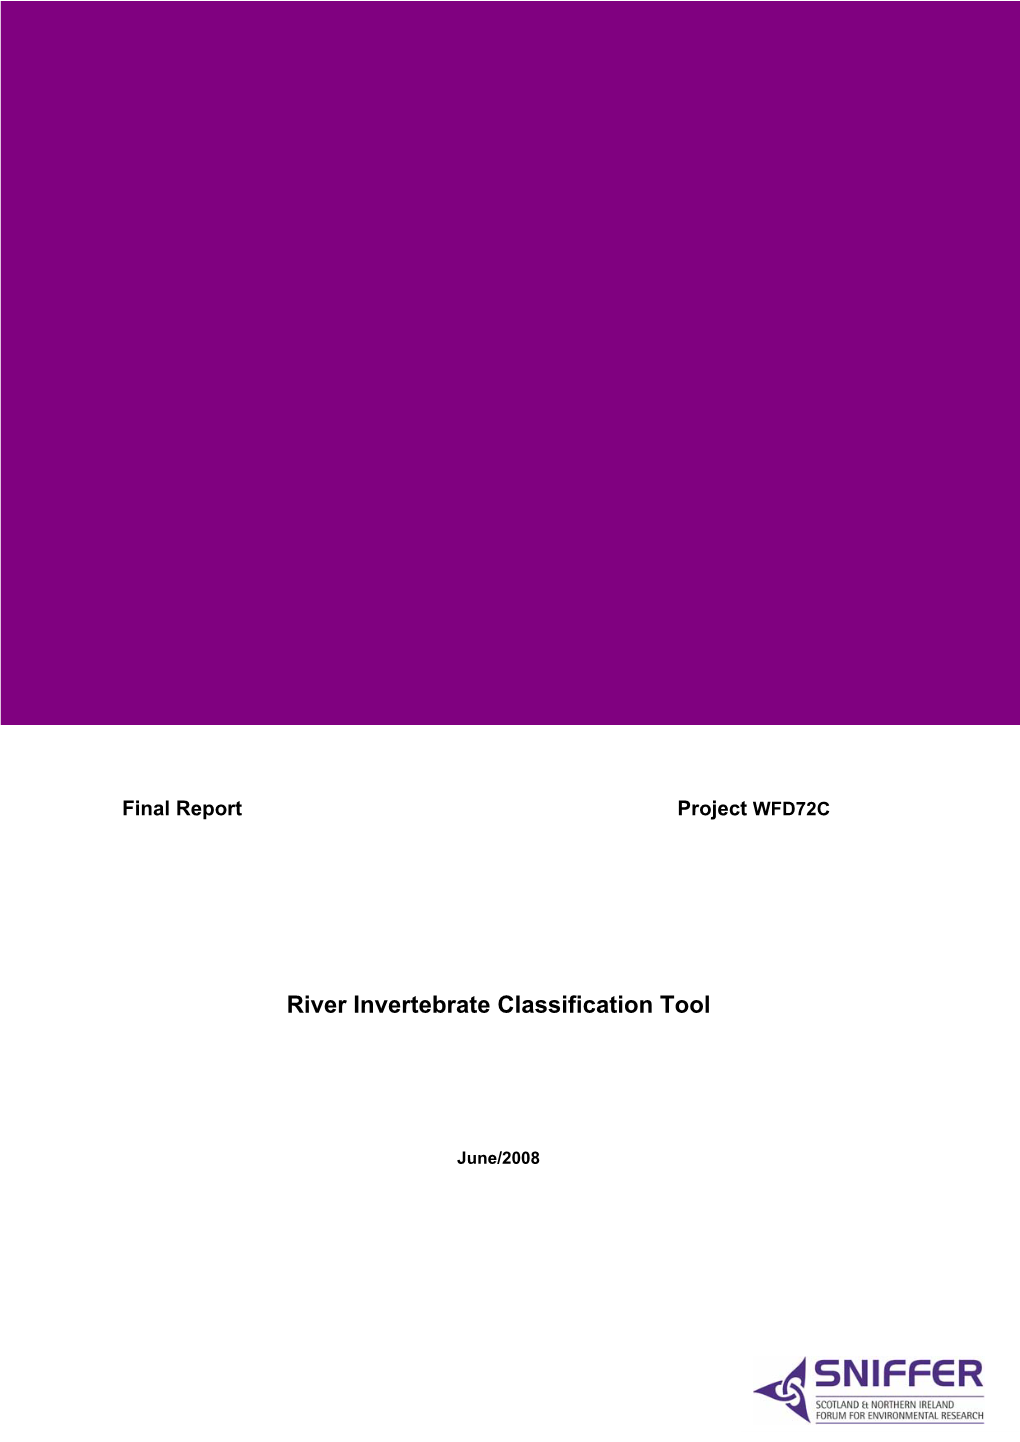 SNIFFER WFD72C Final Report on River Invertebrate Classification Tool